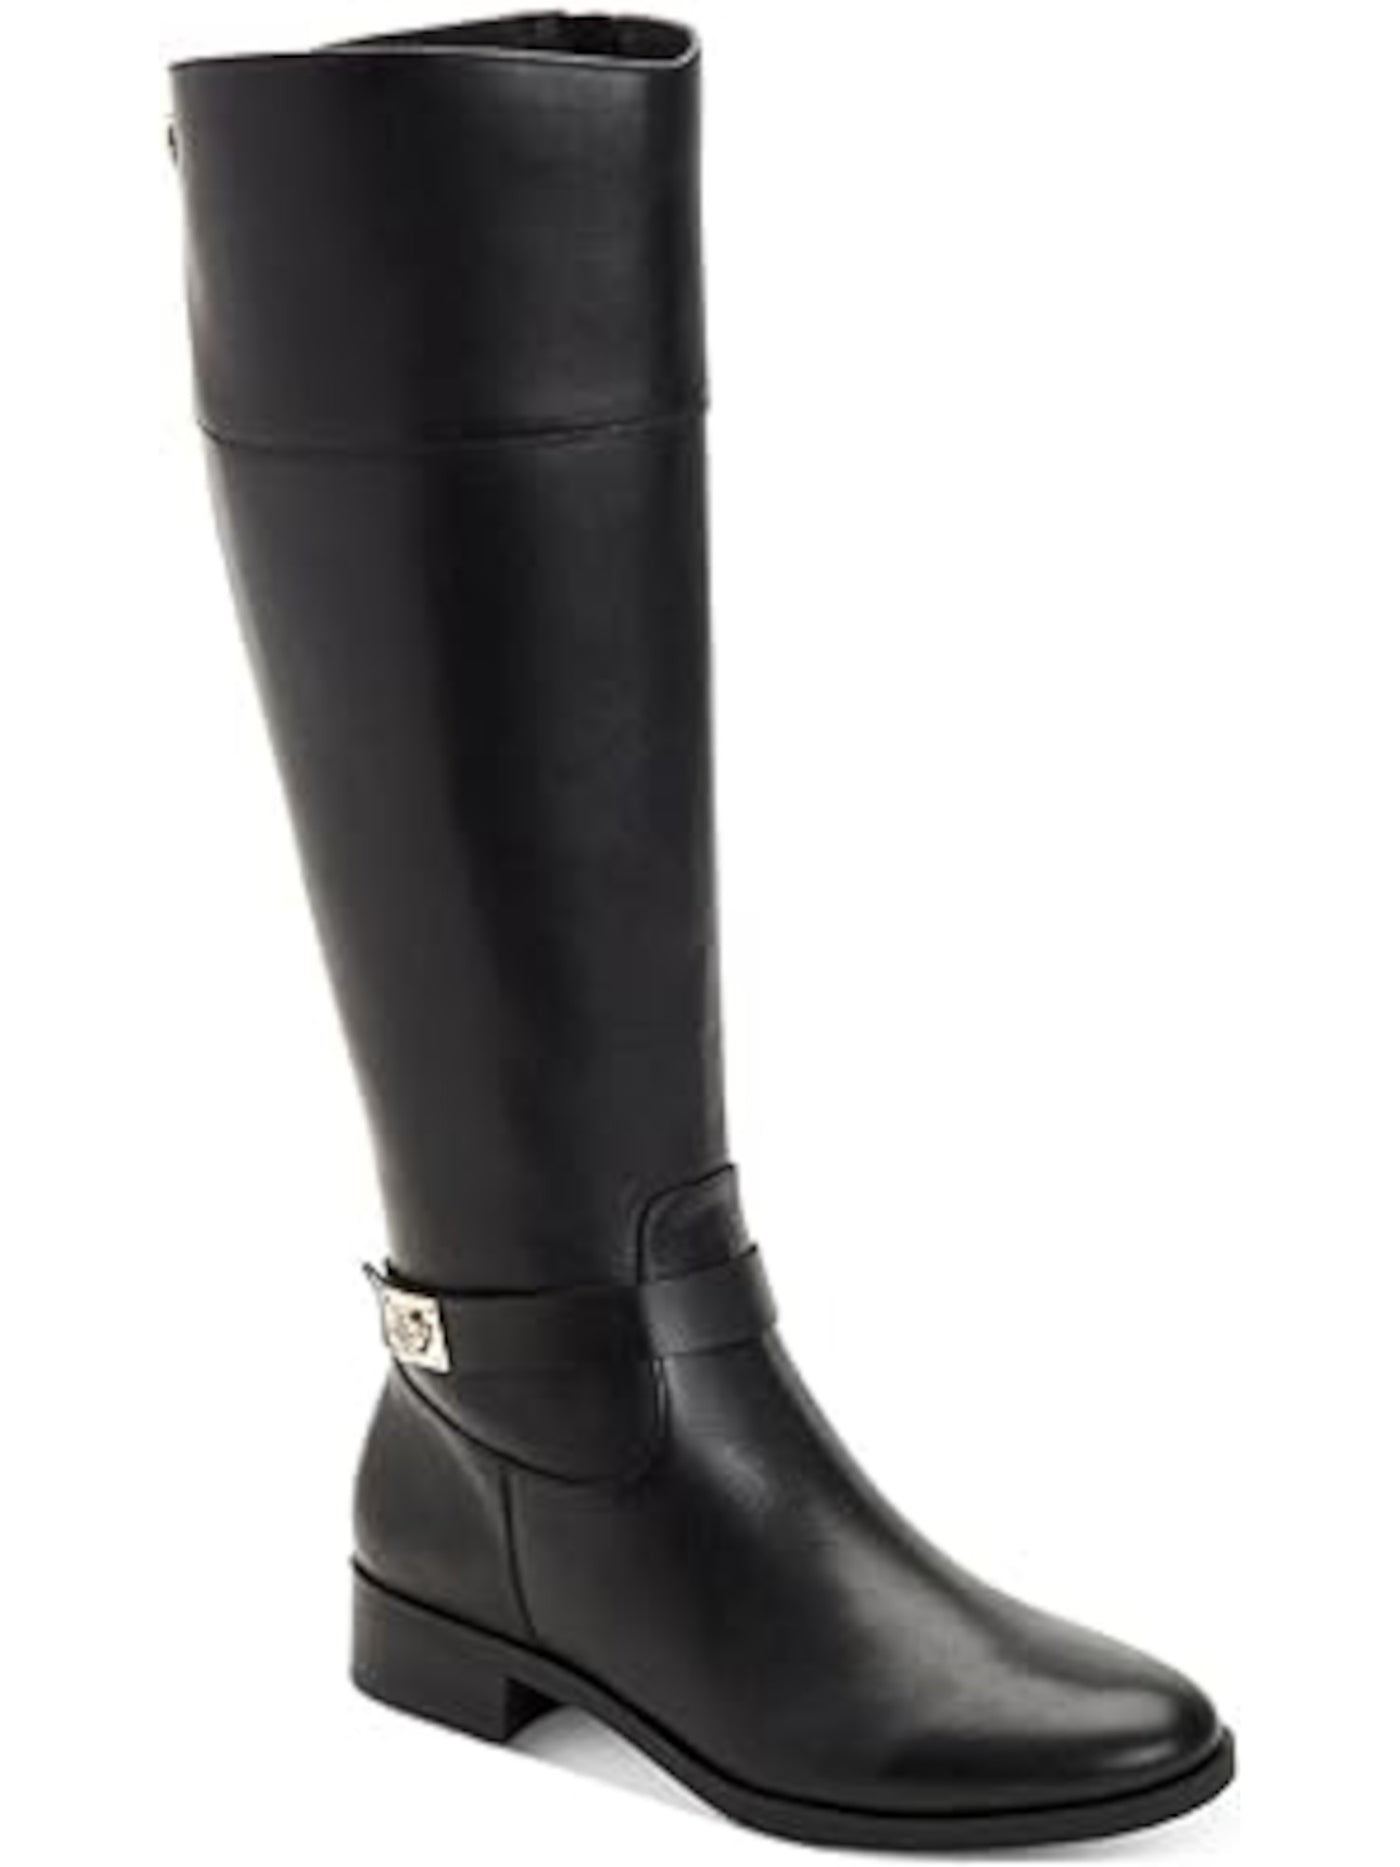 CHARTER CLUB Womens Black Buckle Accent Johannes Round Toe Zip-Up Riding Boot 6 M